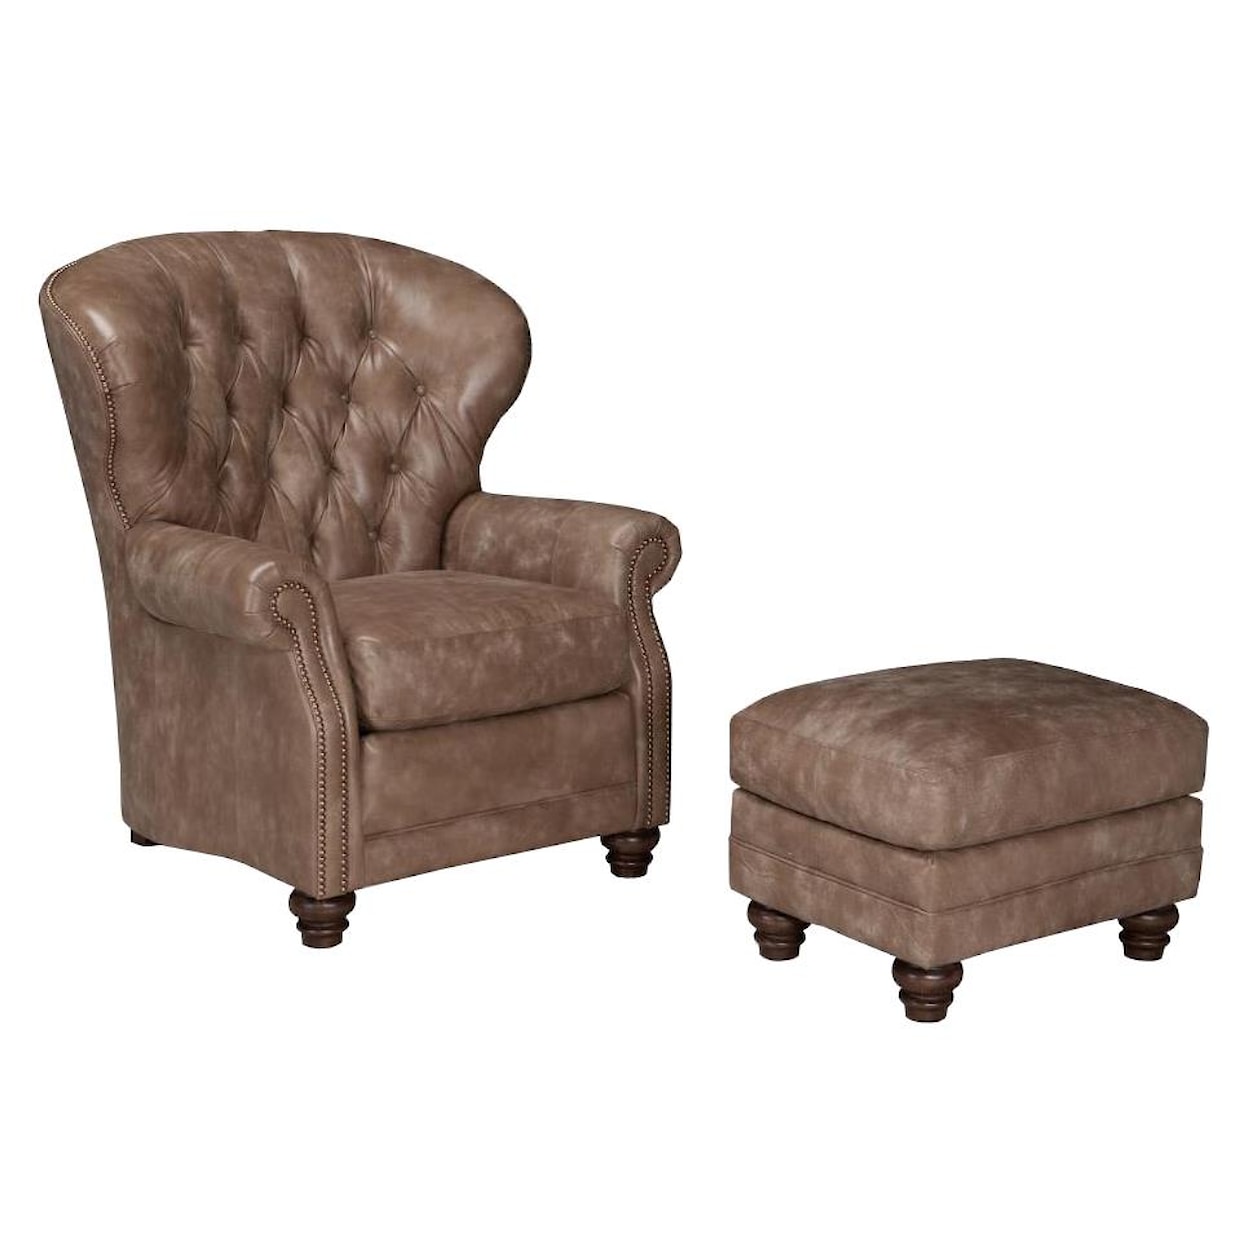 Smith Brothers 522 Chair and Ottoman Set